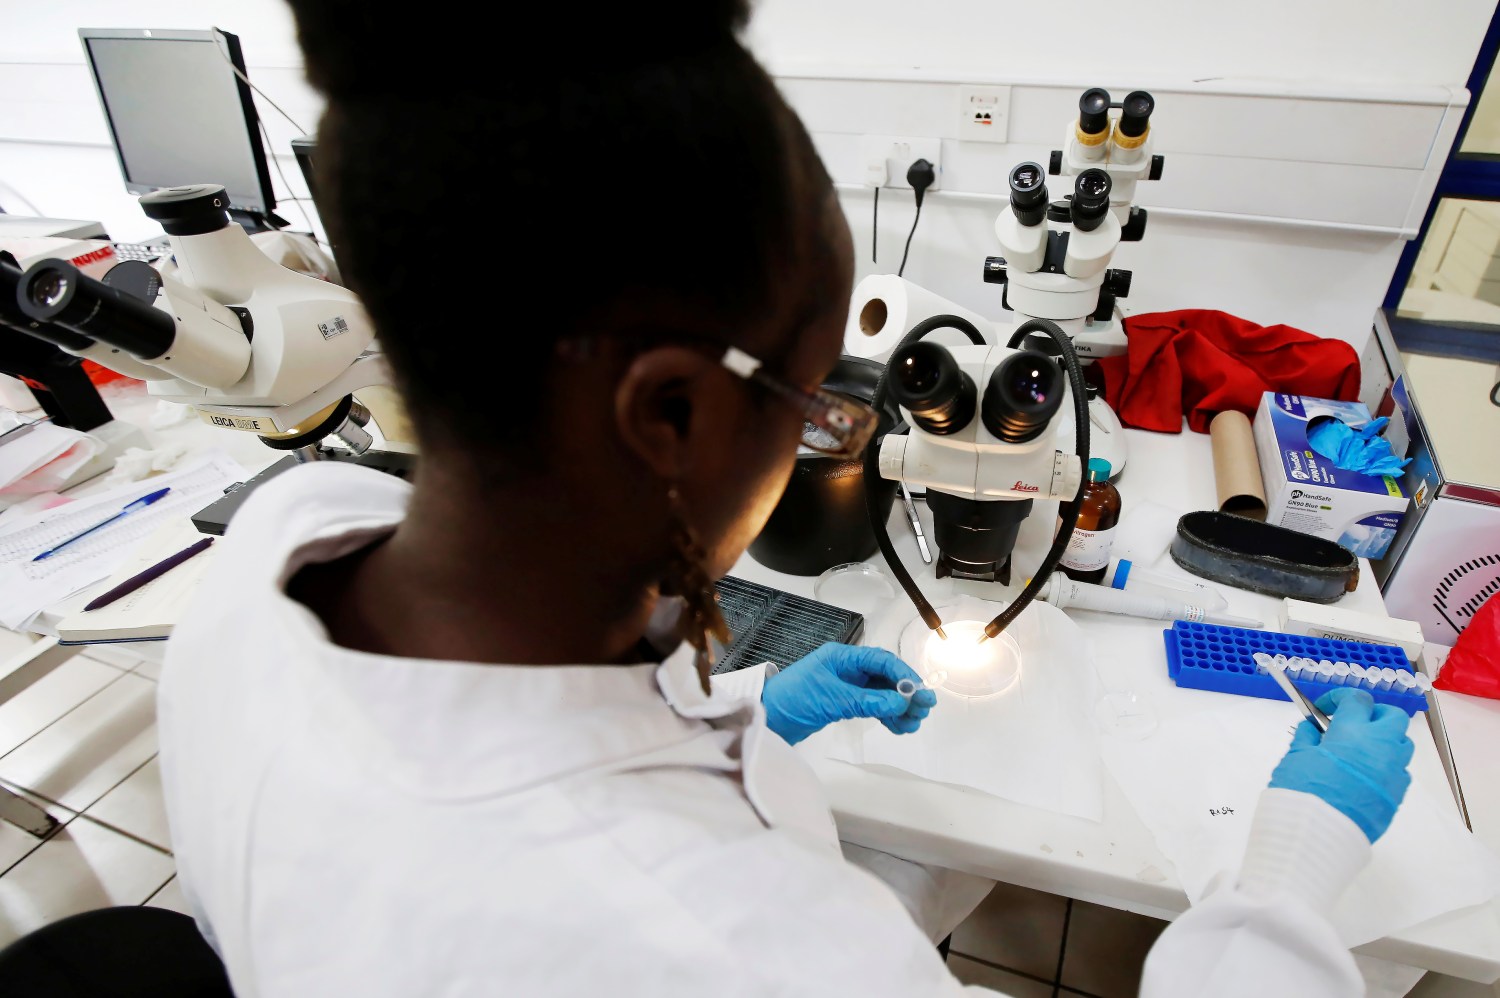 A researcher works inside a laboratory at the International Centre of Insect Physiology and Ecology (ICIPE) headquarters in Nairobi, Kenya May 11, 2020. Picture taken May 11, 2020. REUTERS/Jackson Njehia